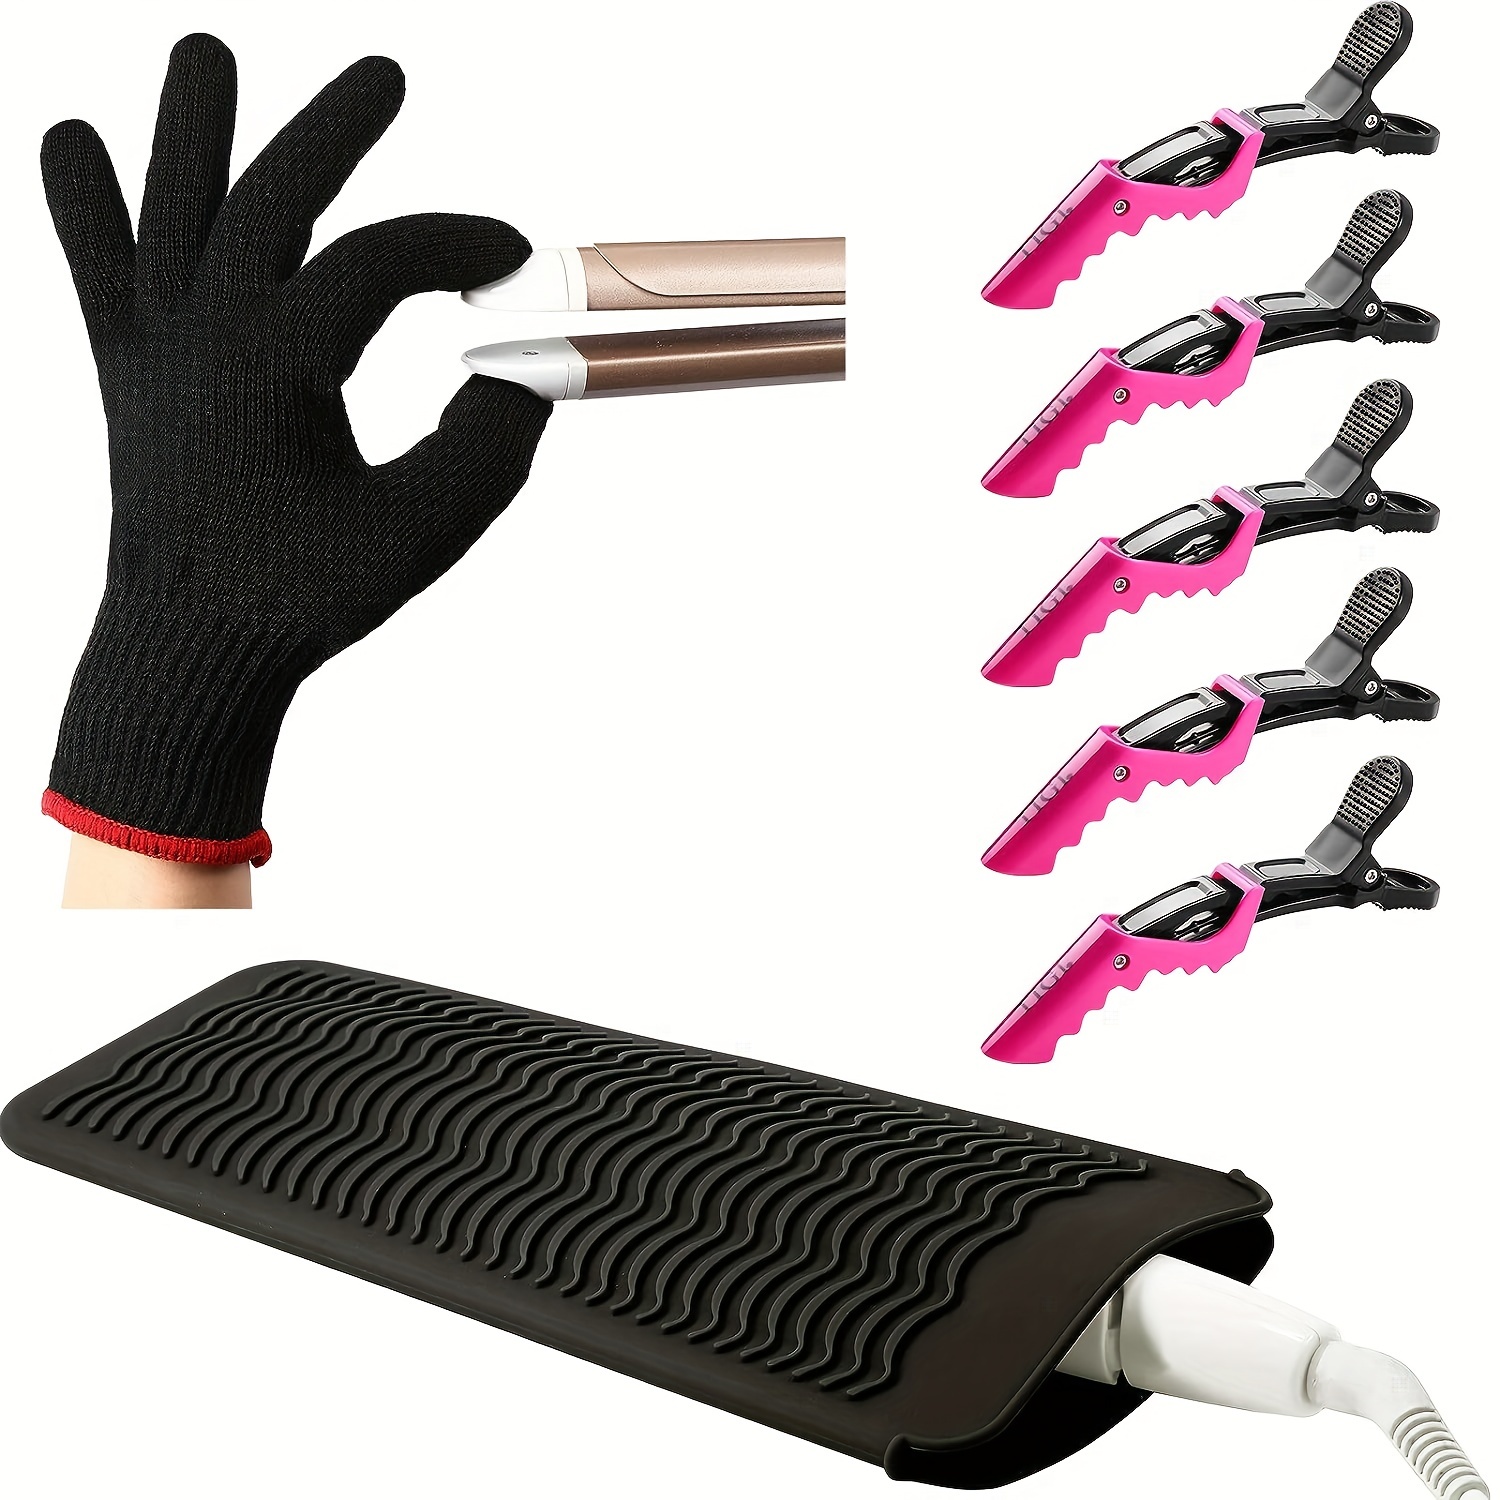  Heat Resistant Mat for Hot Styling Tools, Large Silicone Flat  Iron Mat for Hair Straightener, Travel Anti Heat Pad for Curling Wand, Hair  Tools Appliances (Black) : Beauty & Personal